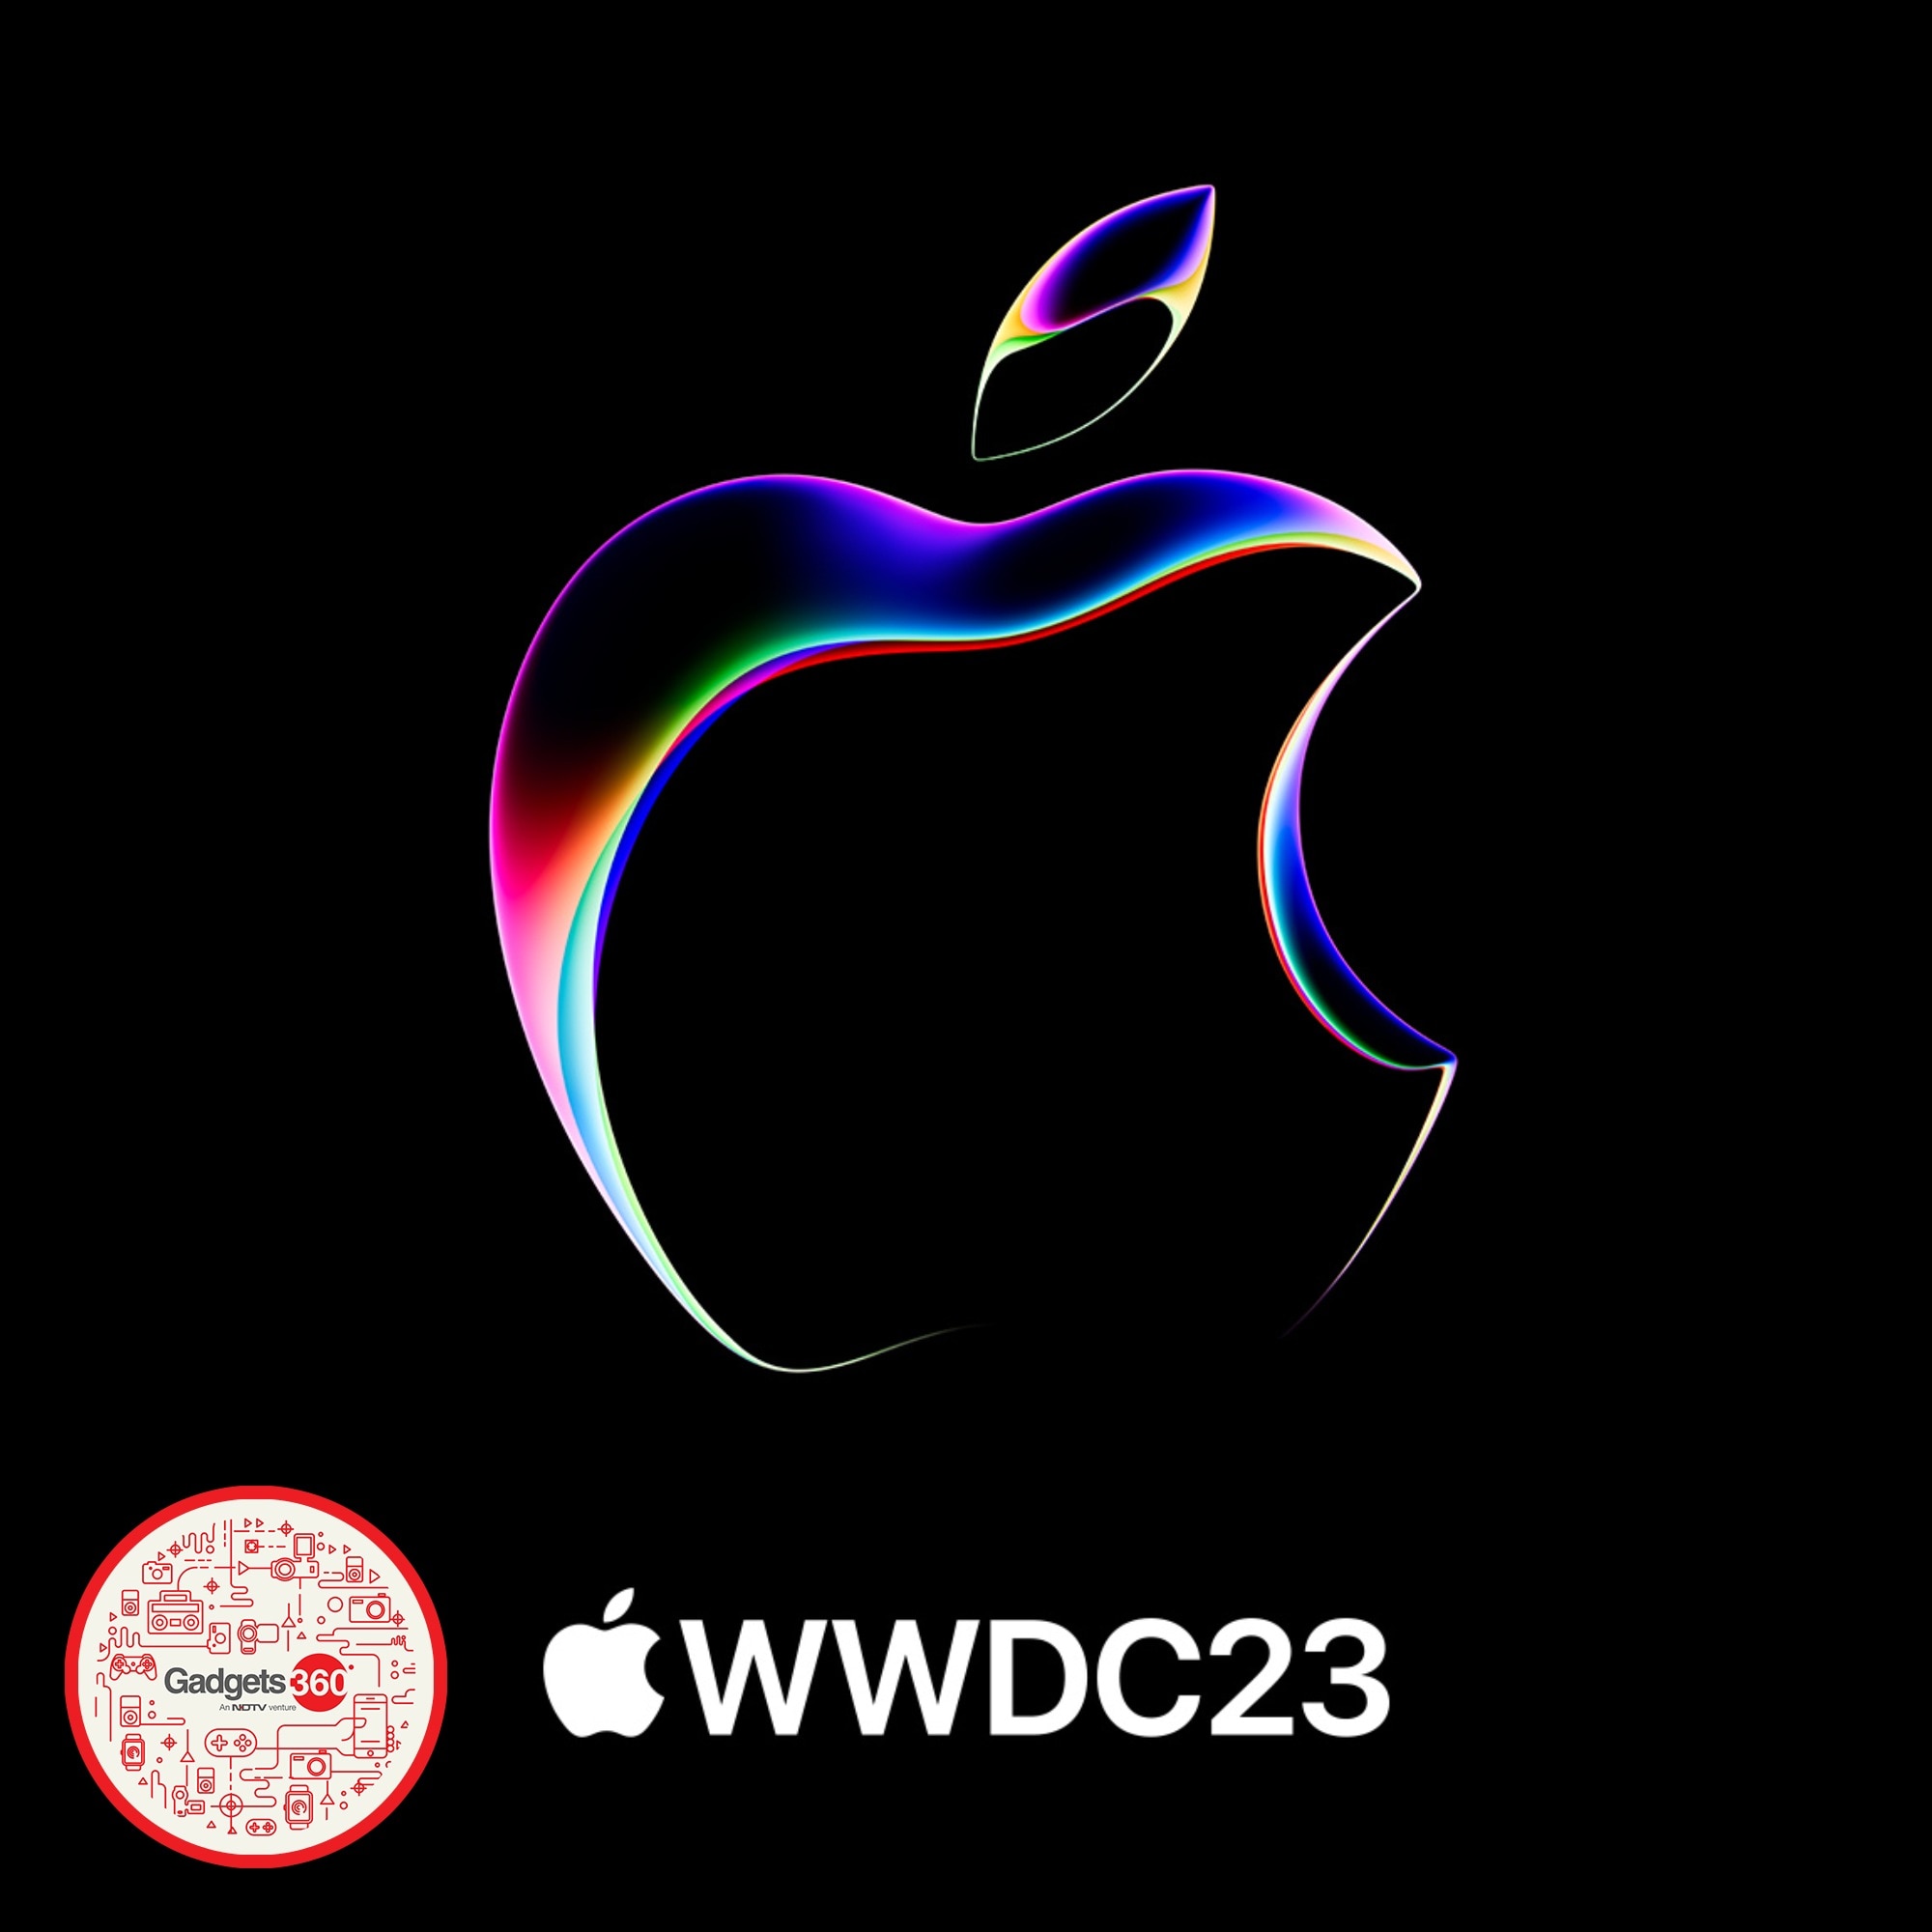 What to expect from Apple's WWDC 2023 event